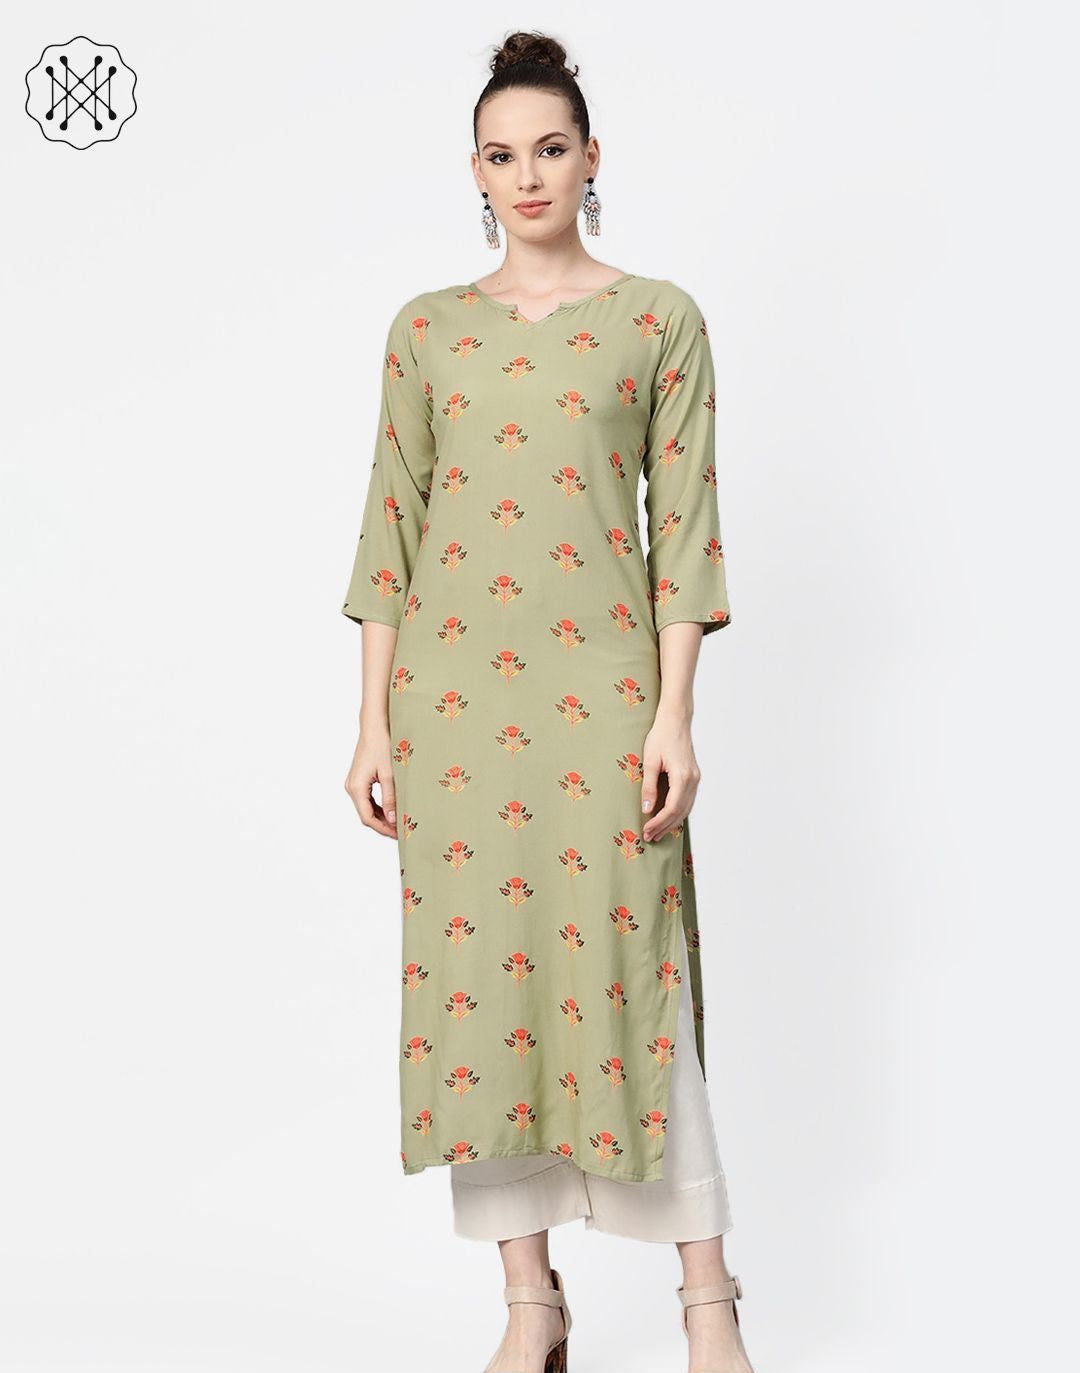 Olive green Multi Colored Printed Kurta with Round Neck with V & 3/4 sleeves